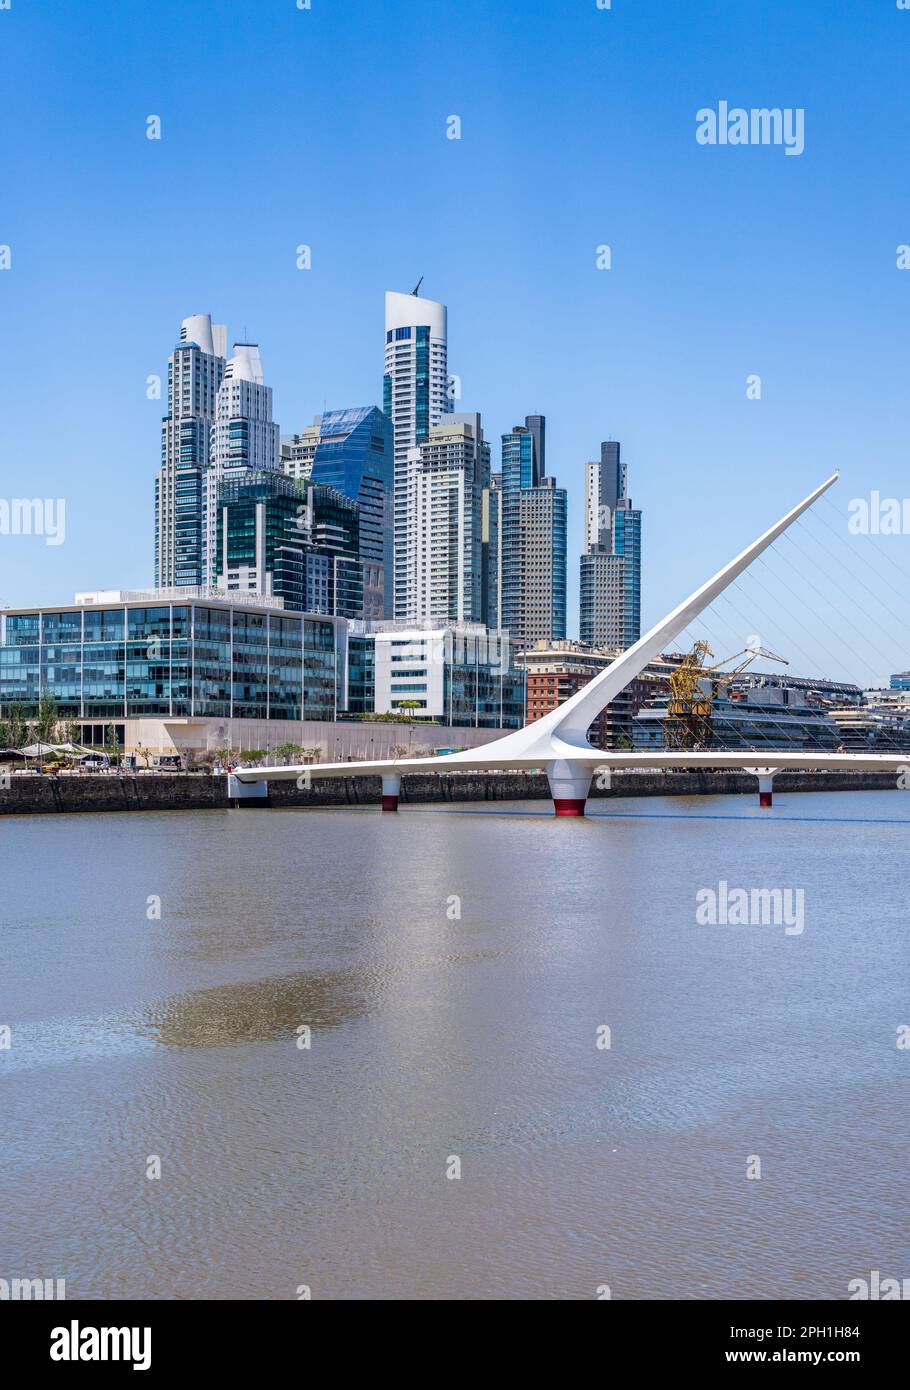 Footbridge and modern offices and apartments in Puerto Madero district of Buenos Aires Stock Photo